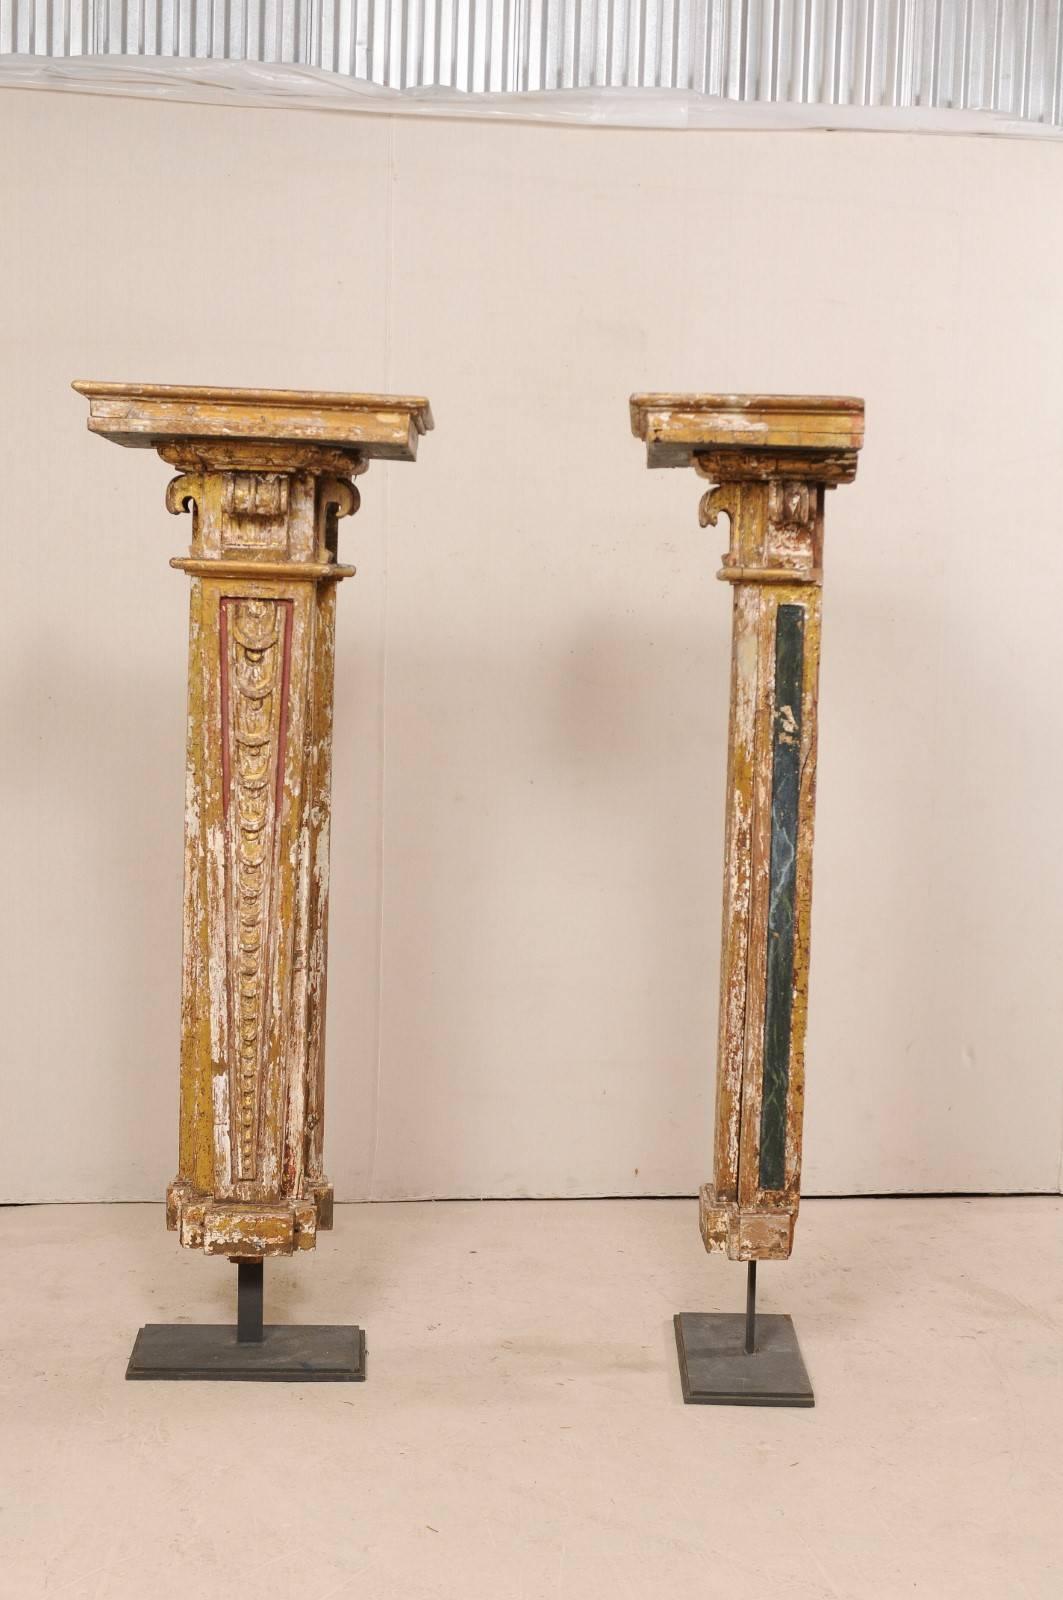 Wood Early 18th Century Italian Pair Exquisite Columns on Custom Stands, 6 Ft. Tall